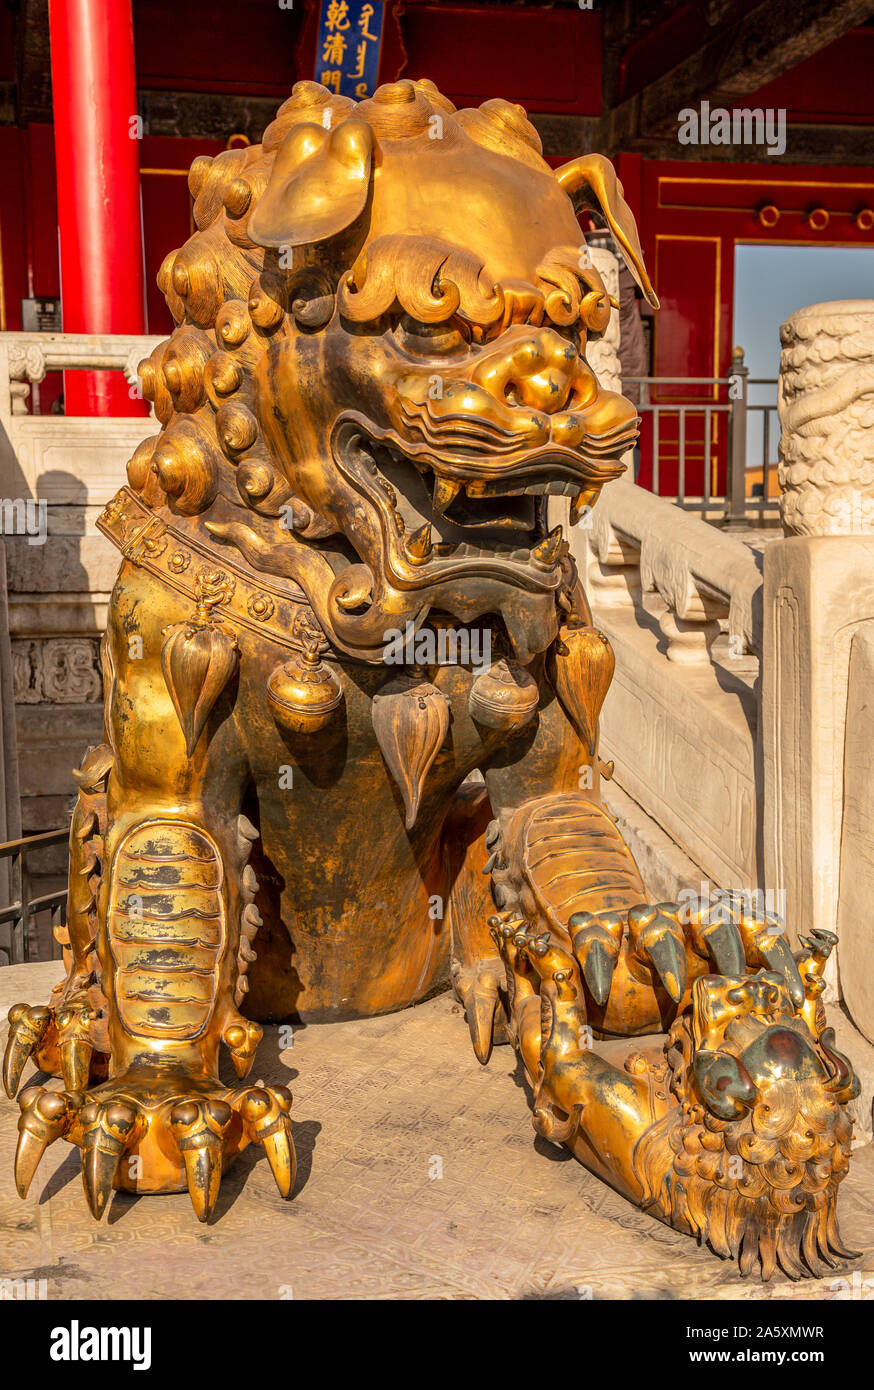 Golden chinese guardian lion or shishi statue from Ming dynasty era, at the entrance to the palace in the Forbidden City, Beijing, China Stock Photo